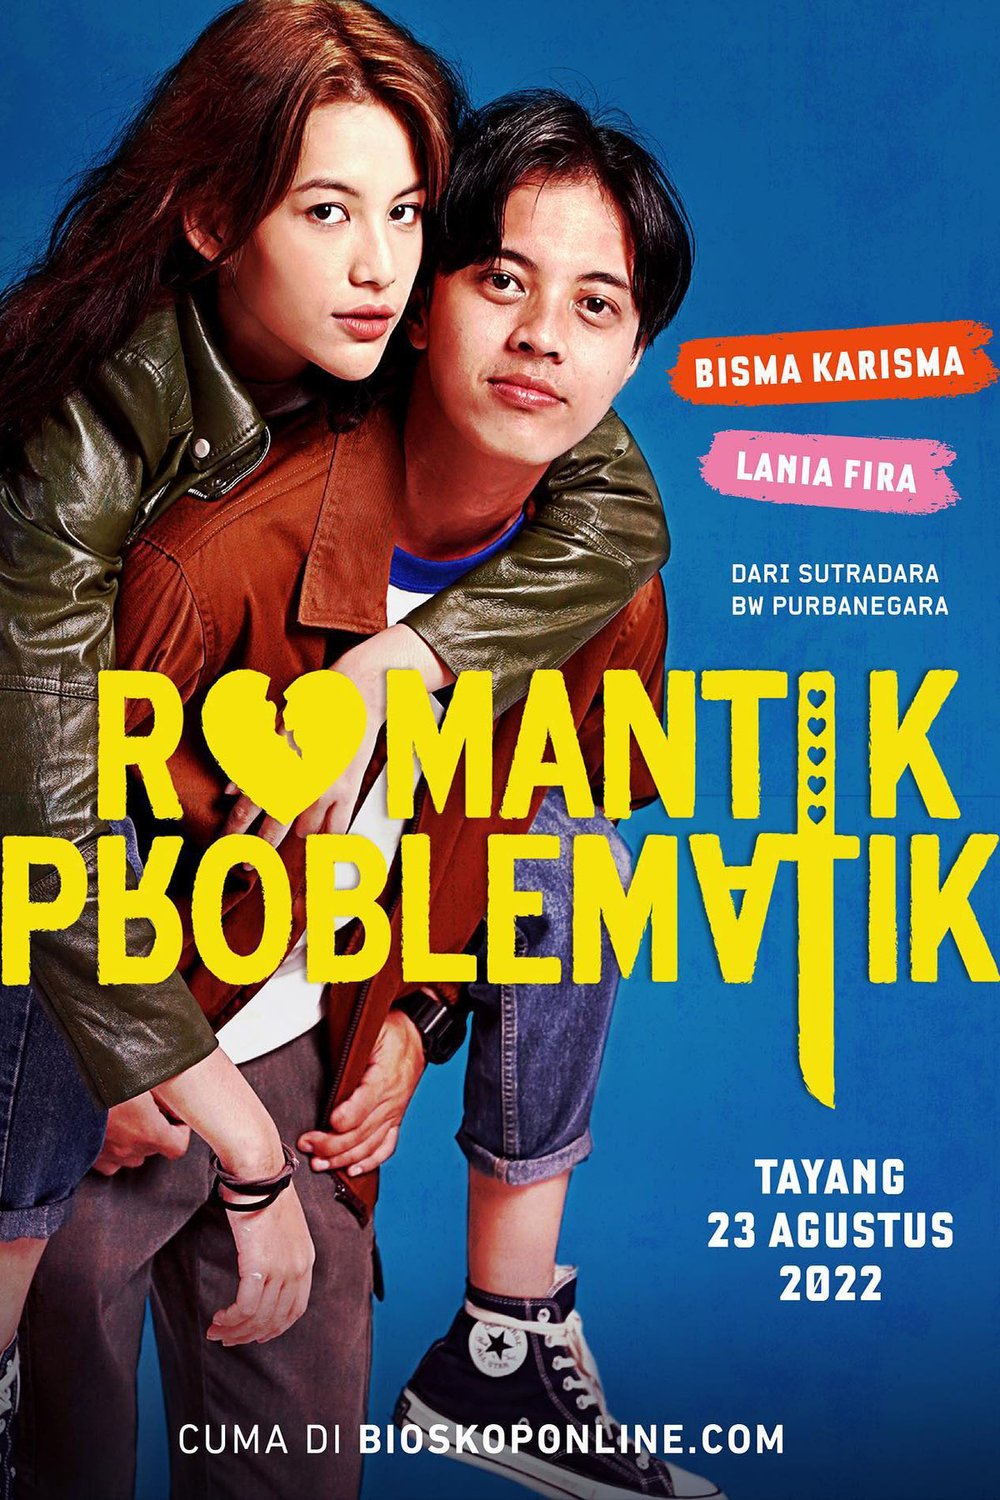 Indonesian poster of the movie Romantic Problematic